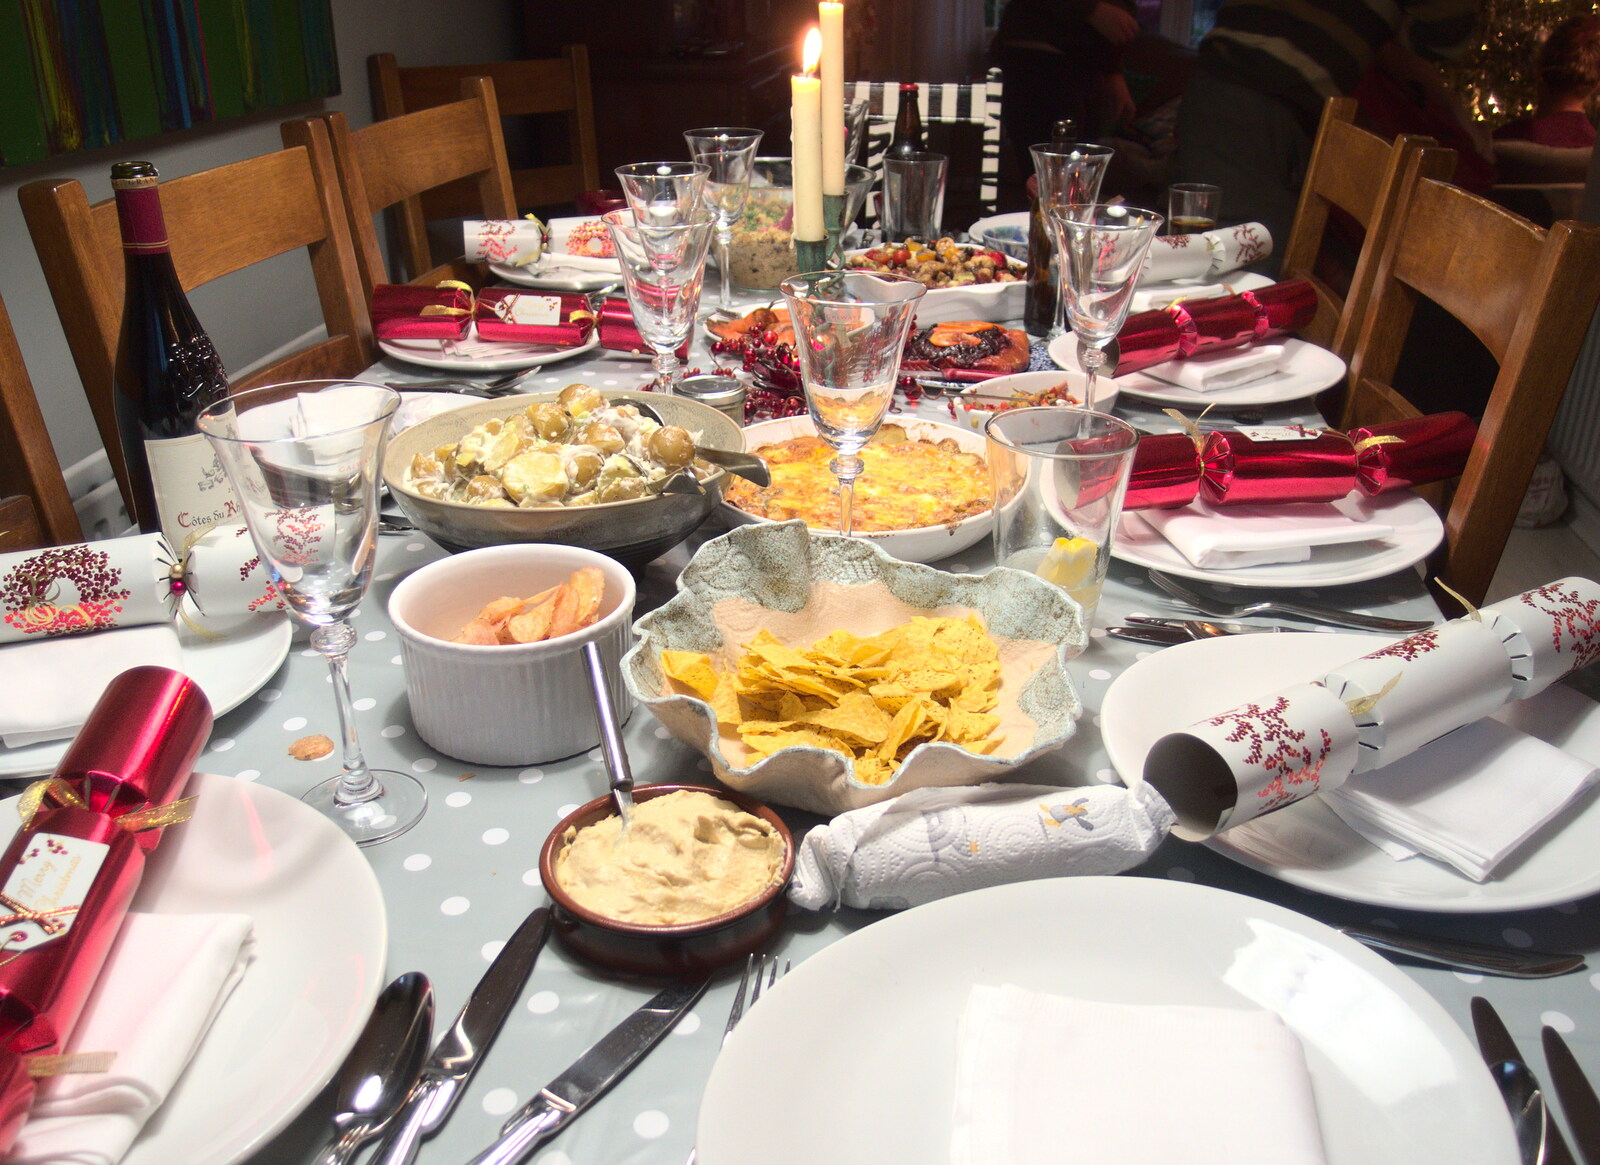 Wayne and Caro's table is loaded from Christmas in Blackrock and St. Stephen's in Ballybrack, Dublin, Ireland - 25th December 2015